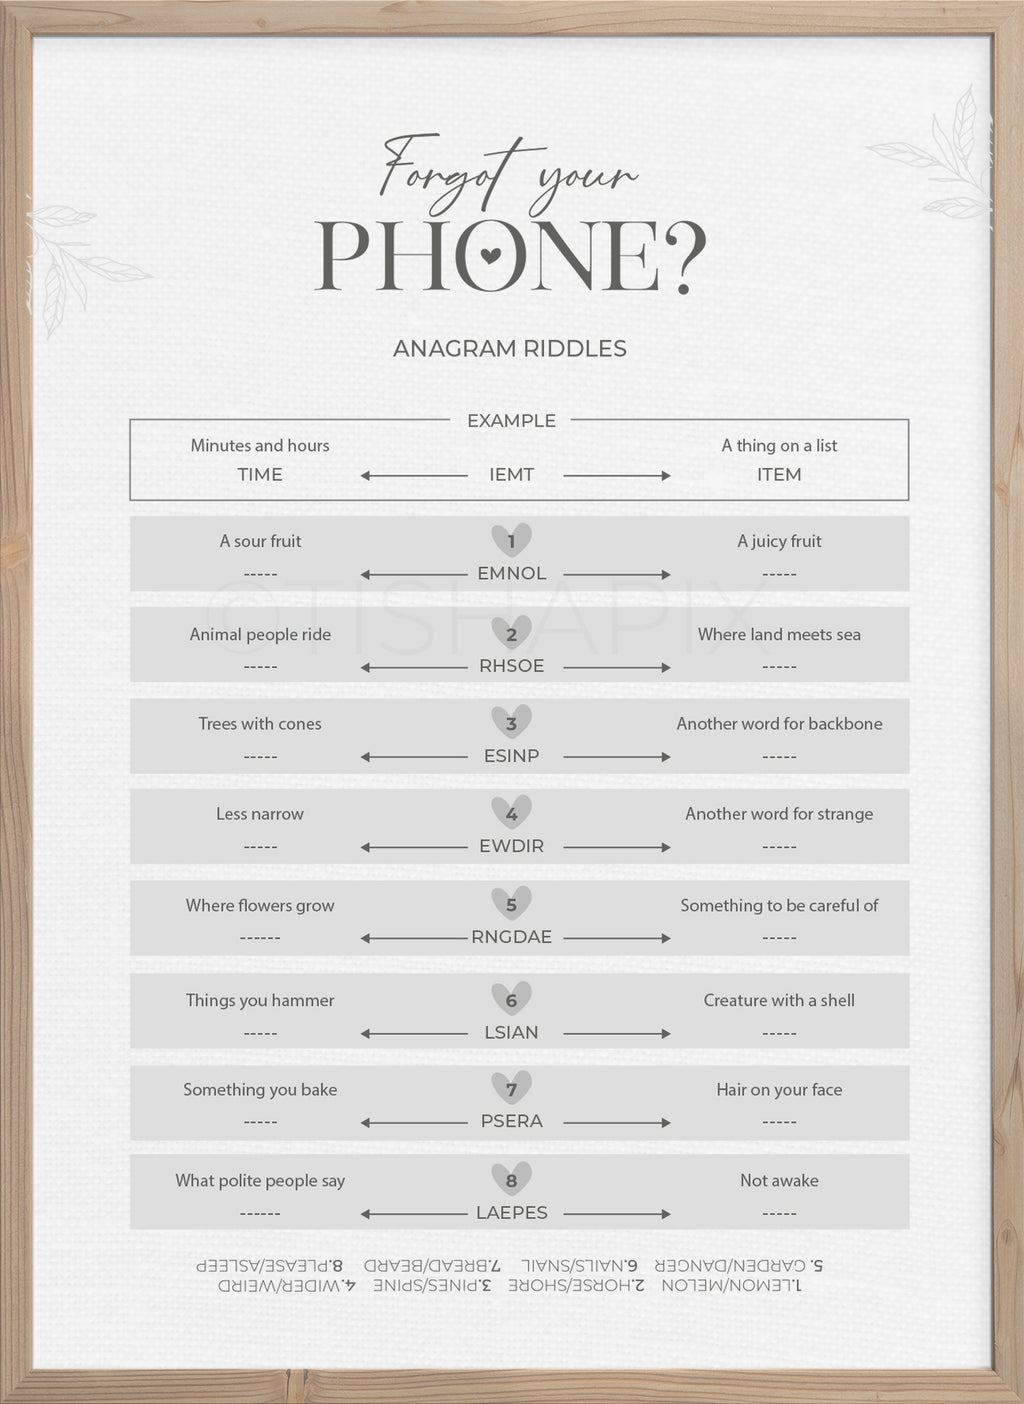 Forgot Your Phone? - Anagram Riddle